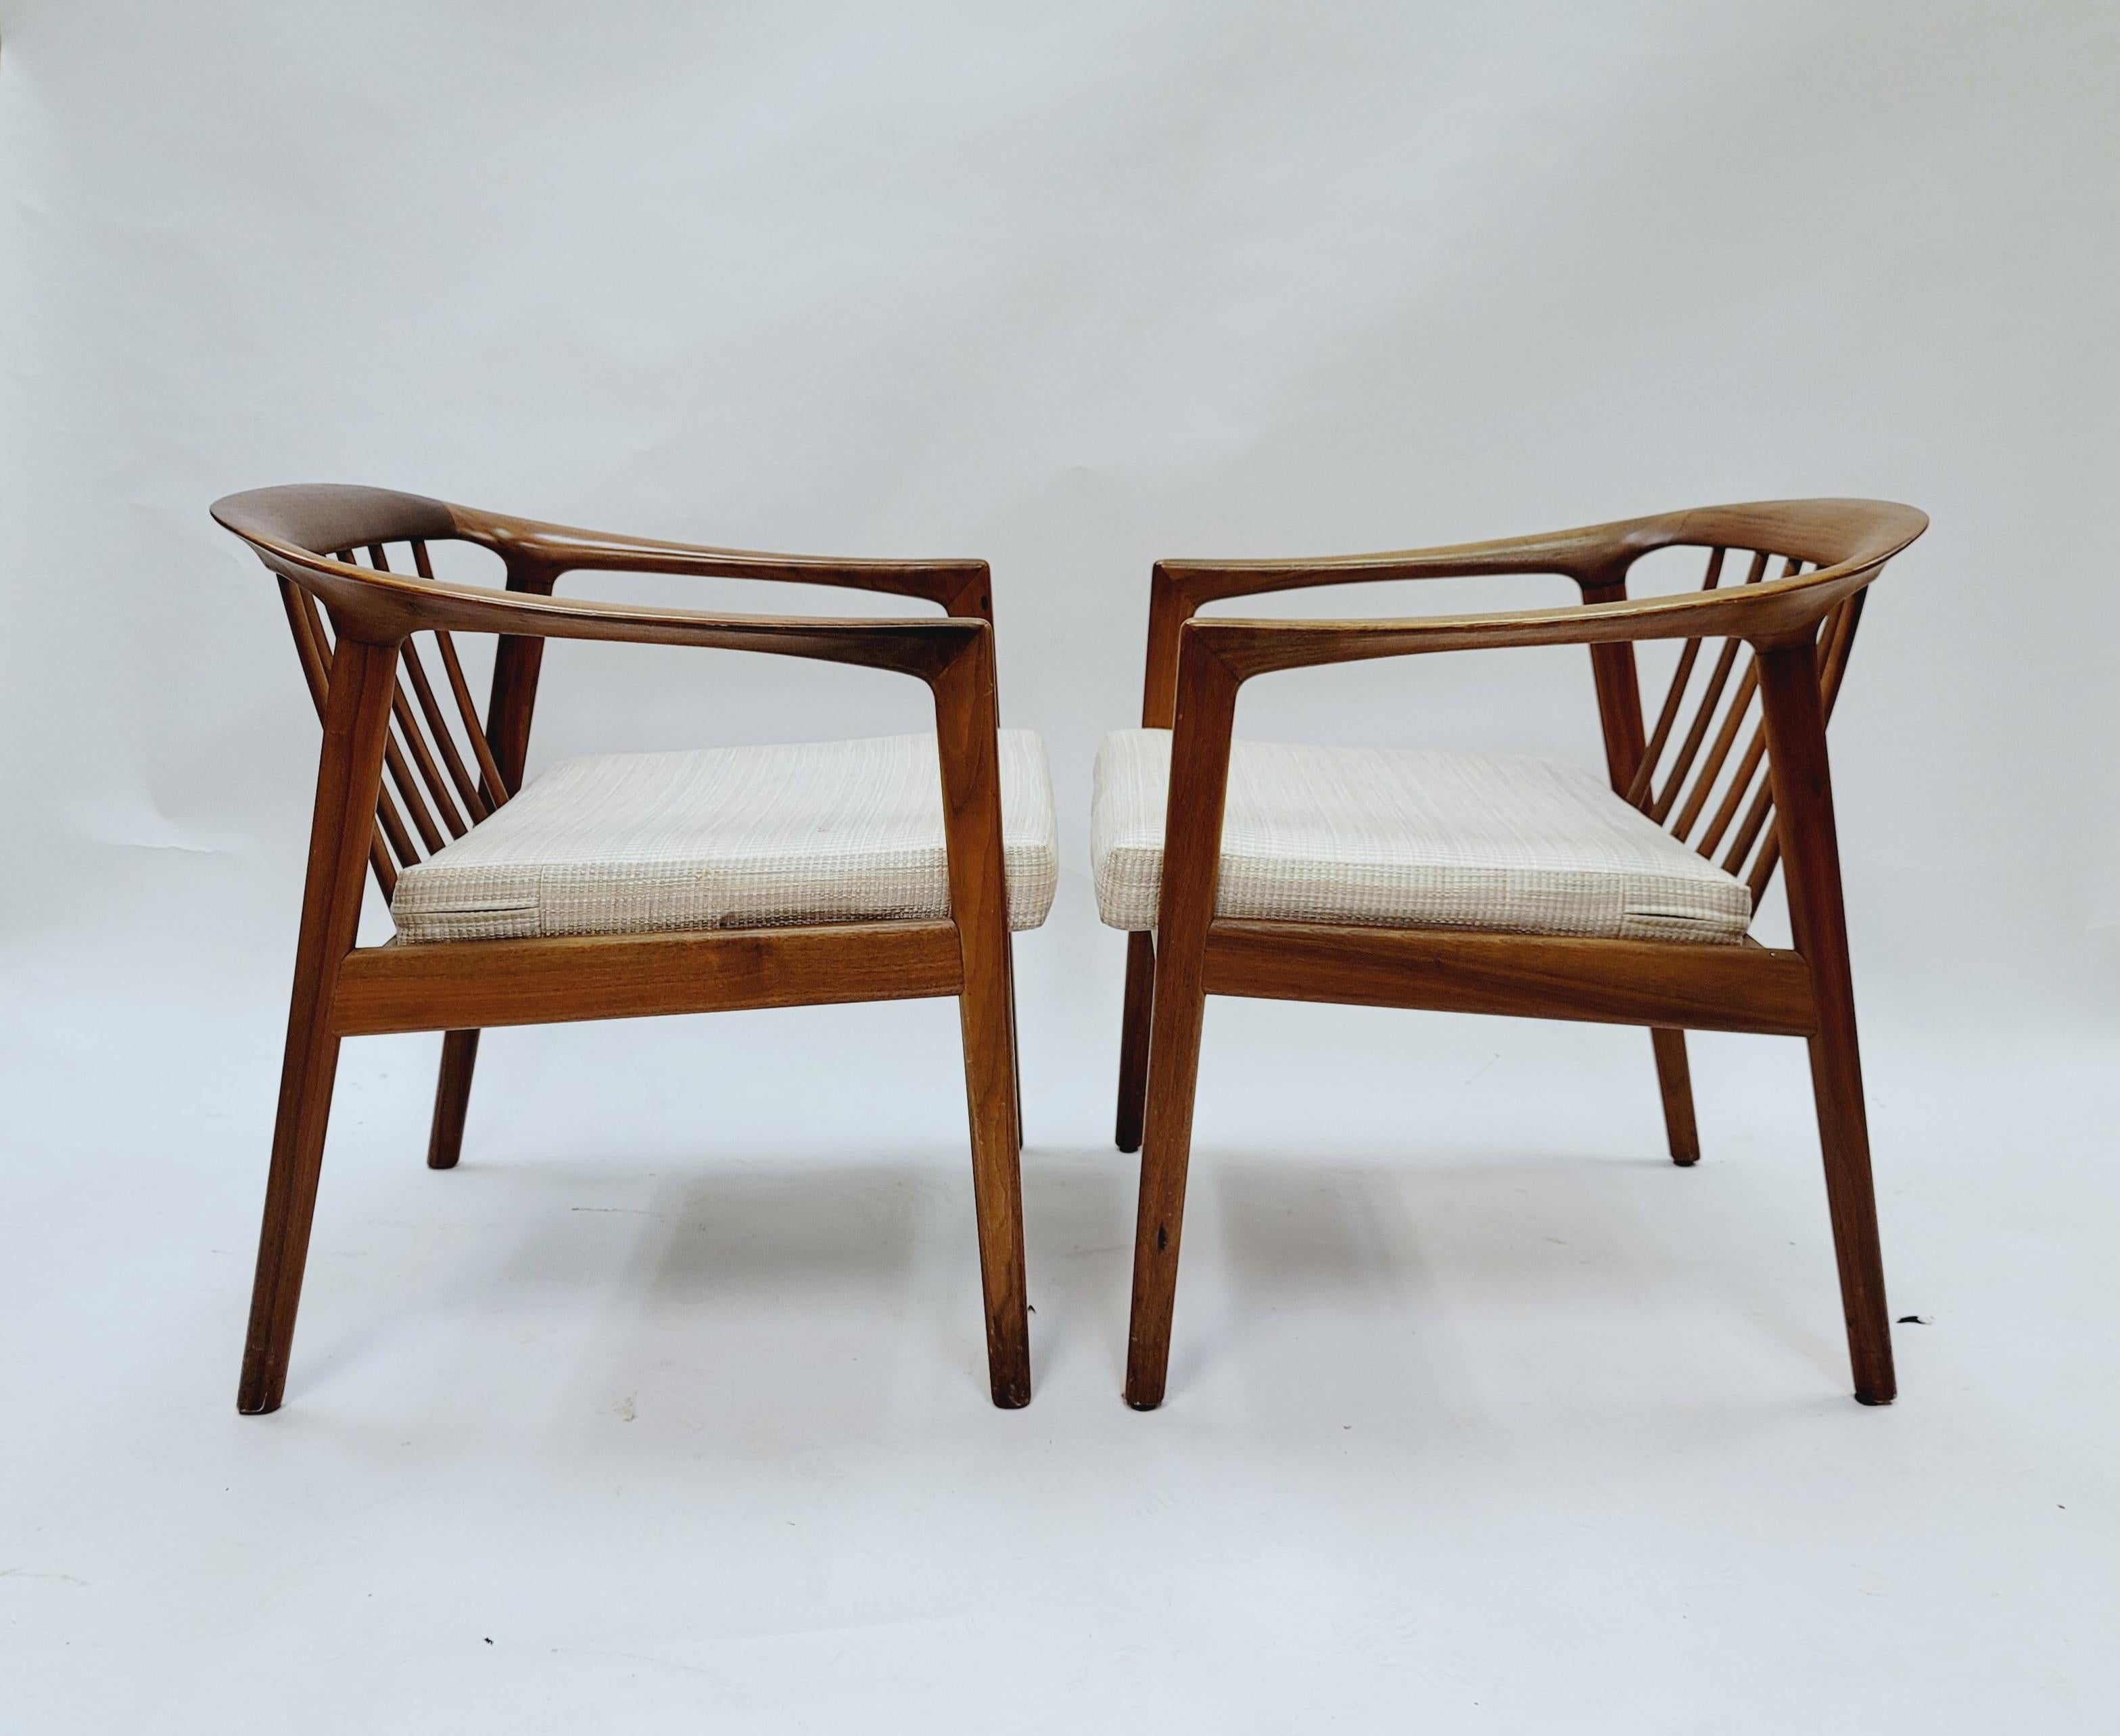 Pair of upholstered armchairs in teak designed by Folke Ohlsson and manufactured by Dux. Crafted from teak, the sculptural curve of the chair is highlighted by the elegant joinery. Stamped with the makers logo on the underside.